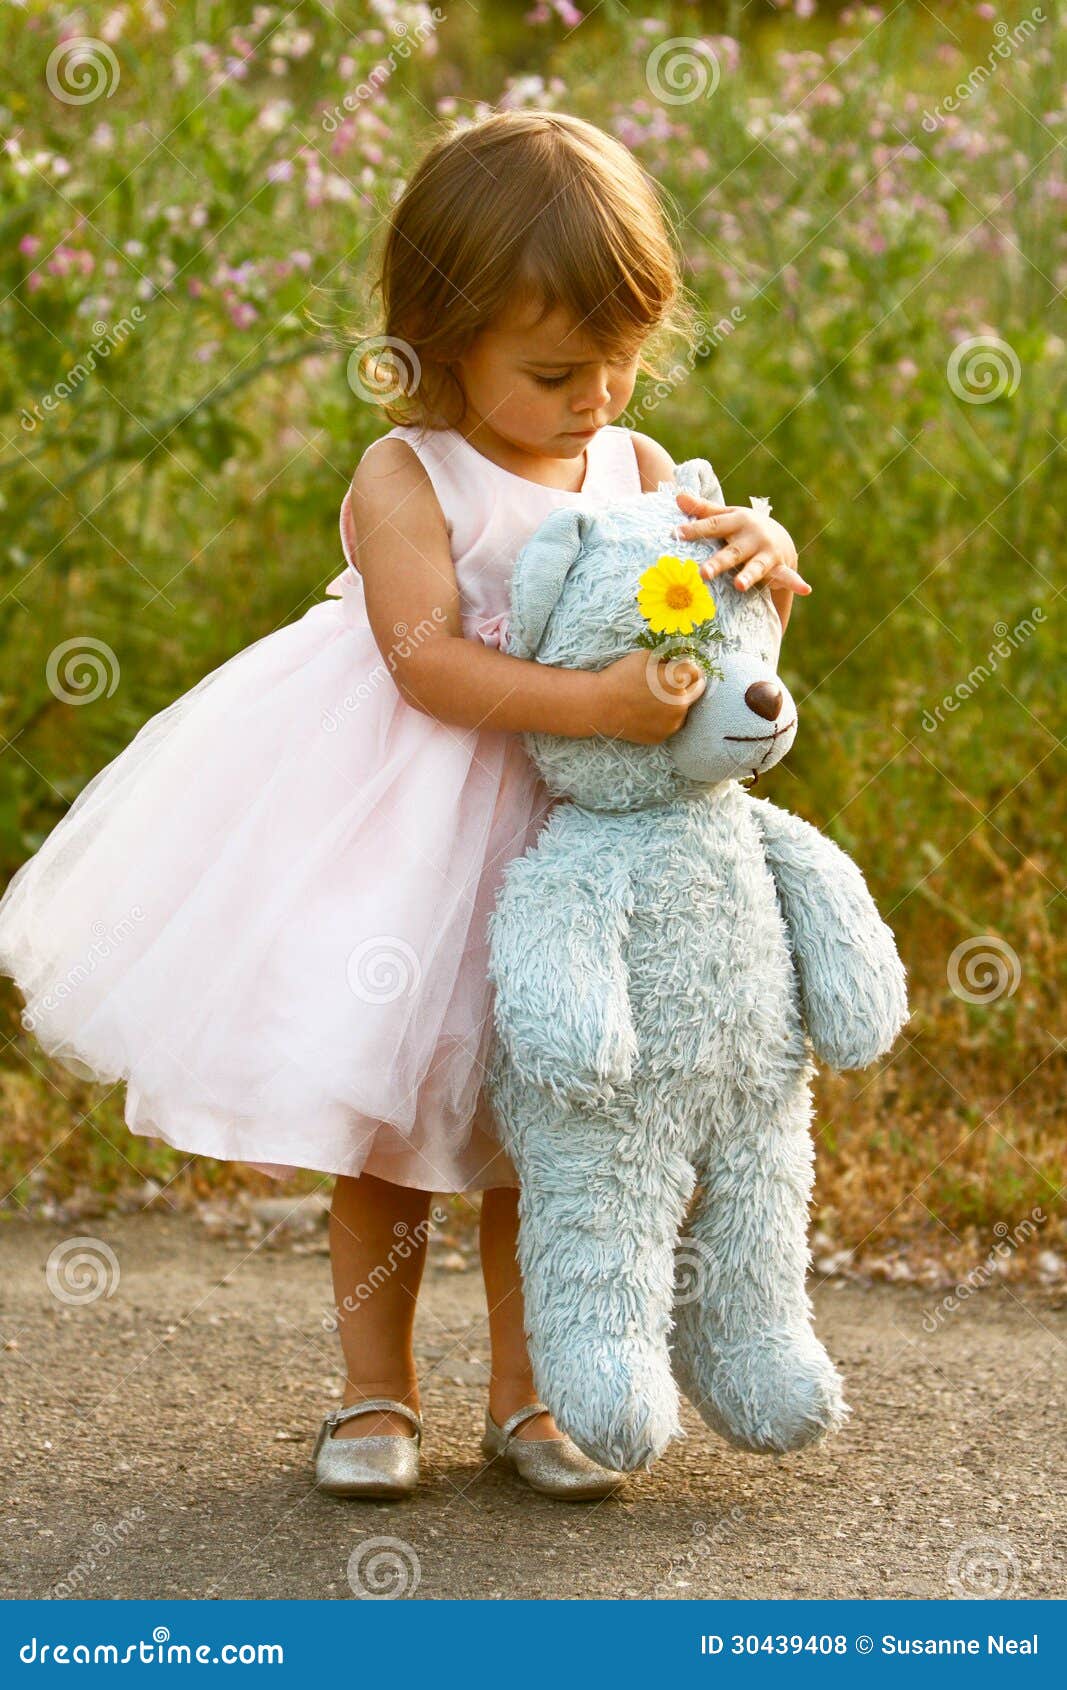 Dressy Two-year-old Girl In Pink Dress Holding Stuffed ...